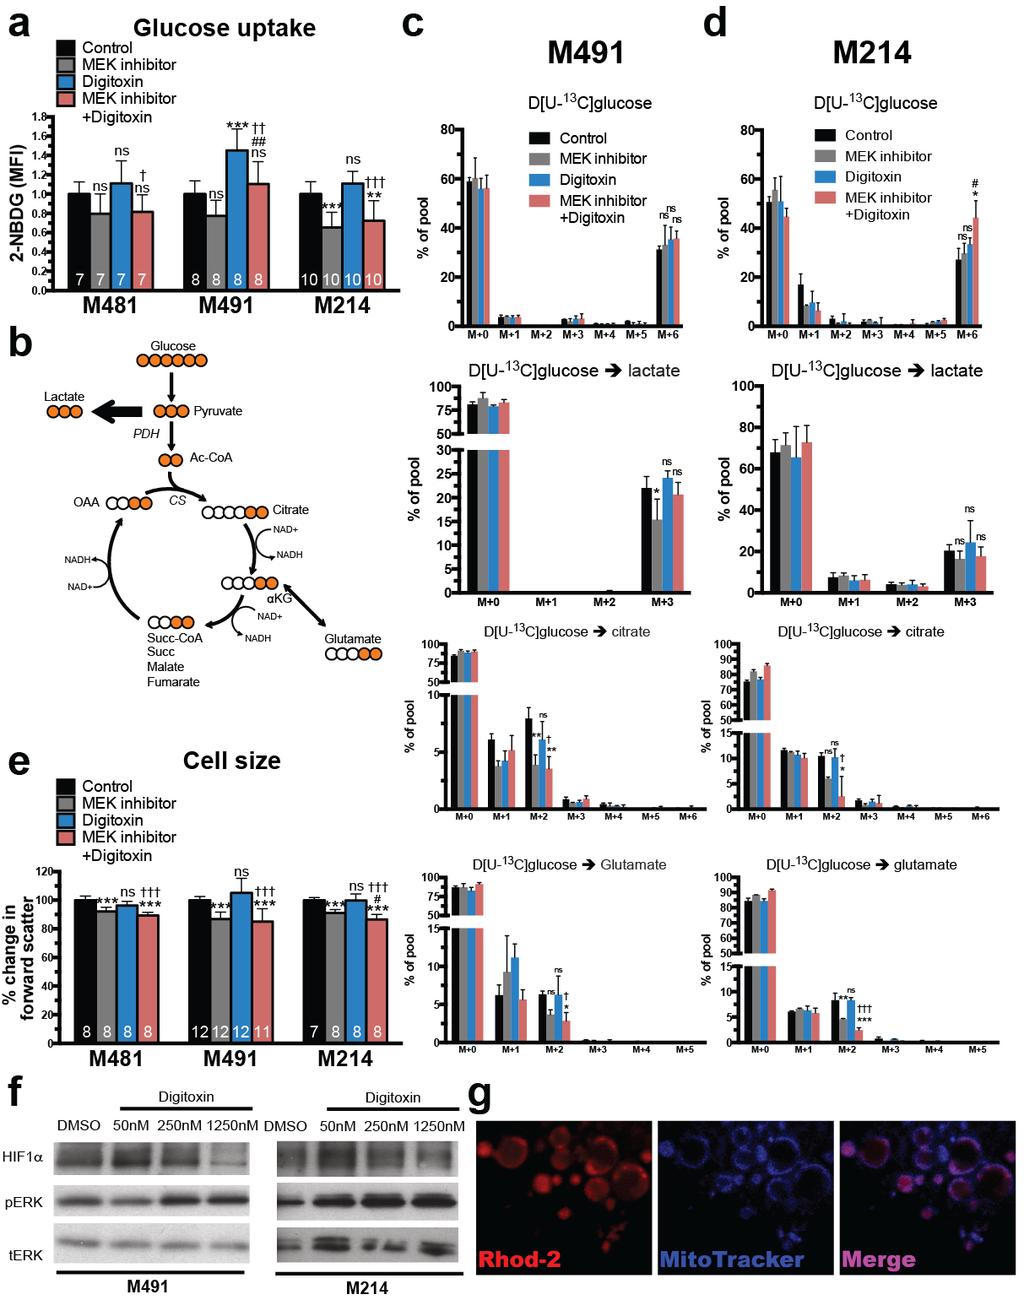 Supplementary Figure 7: MEK inhibitor, but not digitoxin, reduces glucose uptake and cell size in xenografted melanoma cells and in vivo